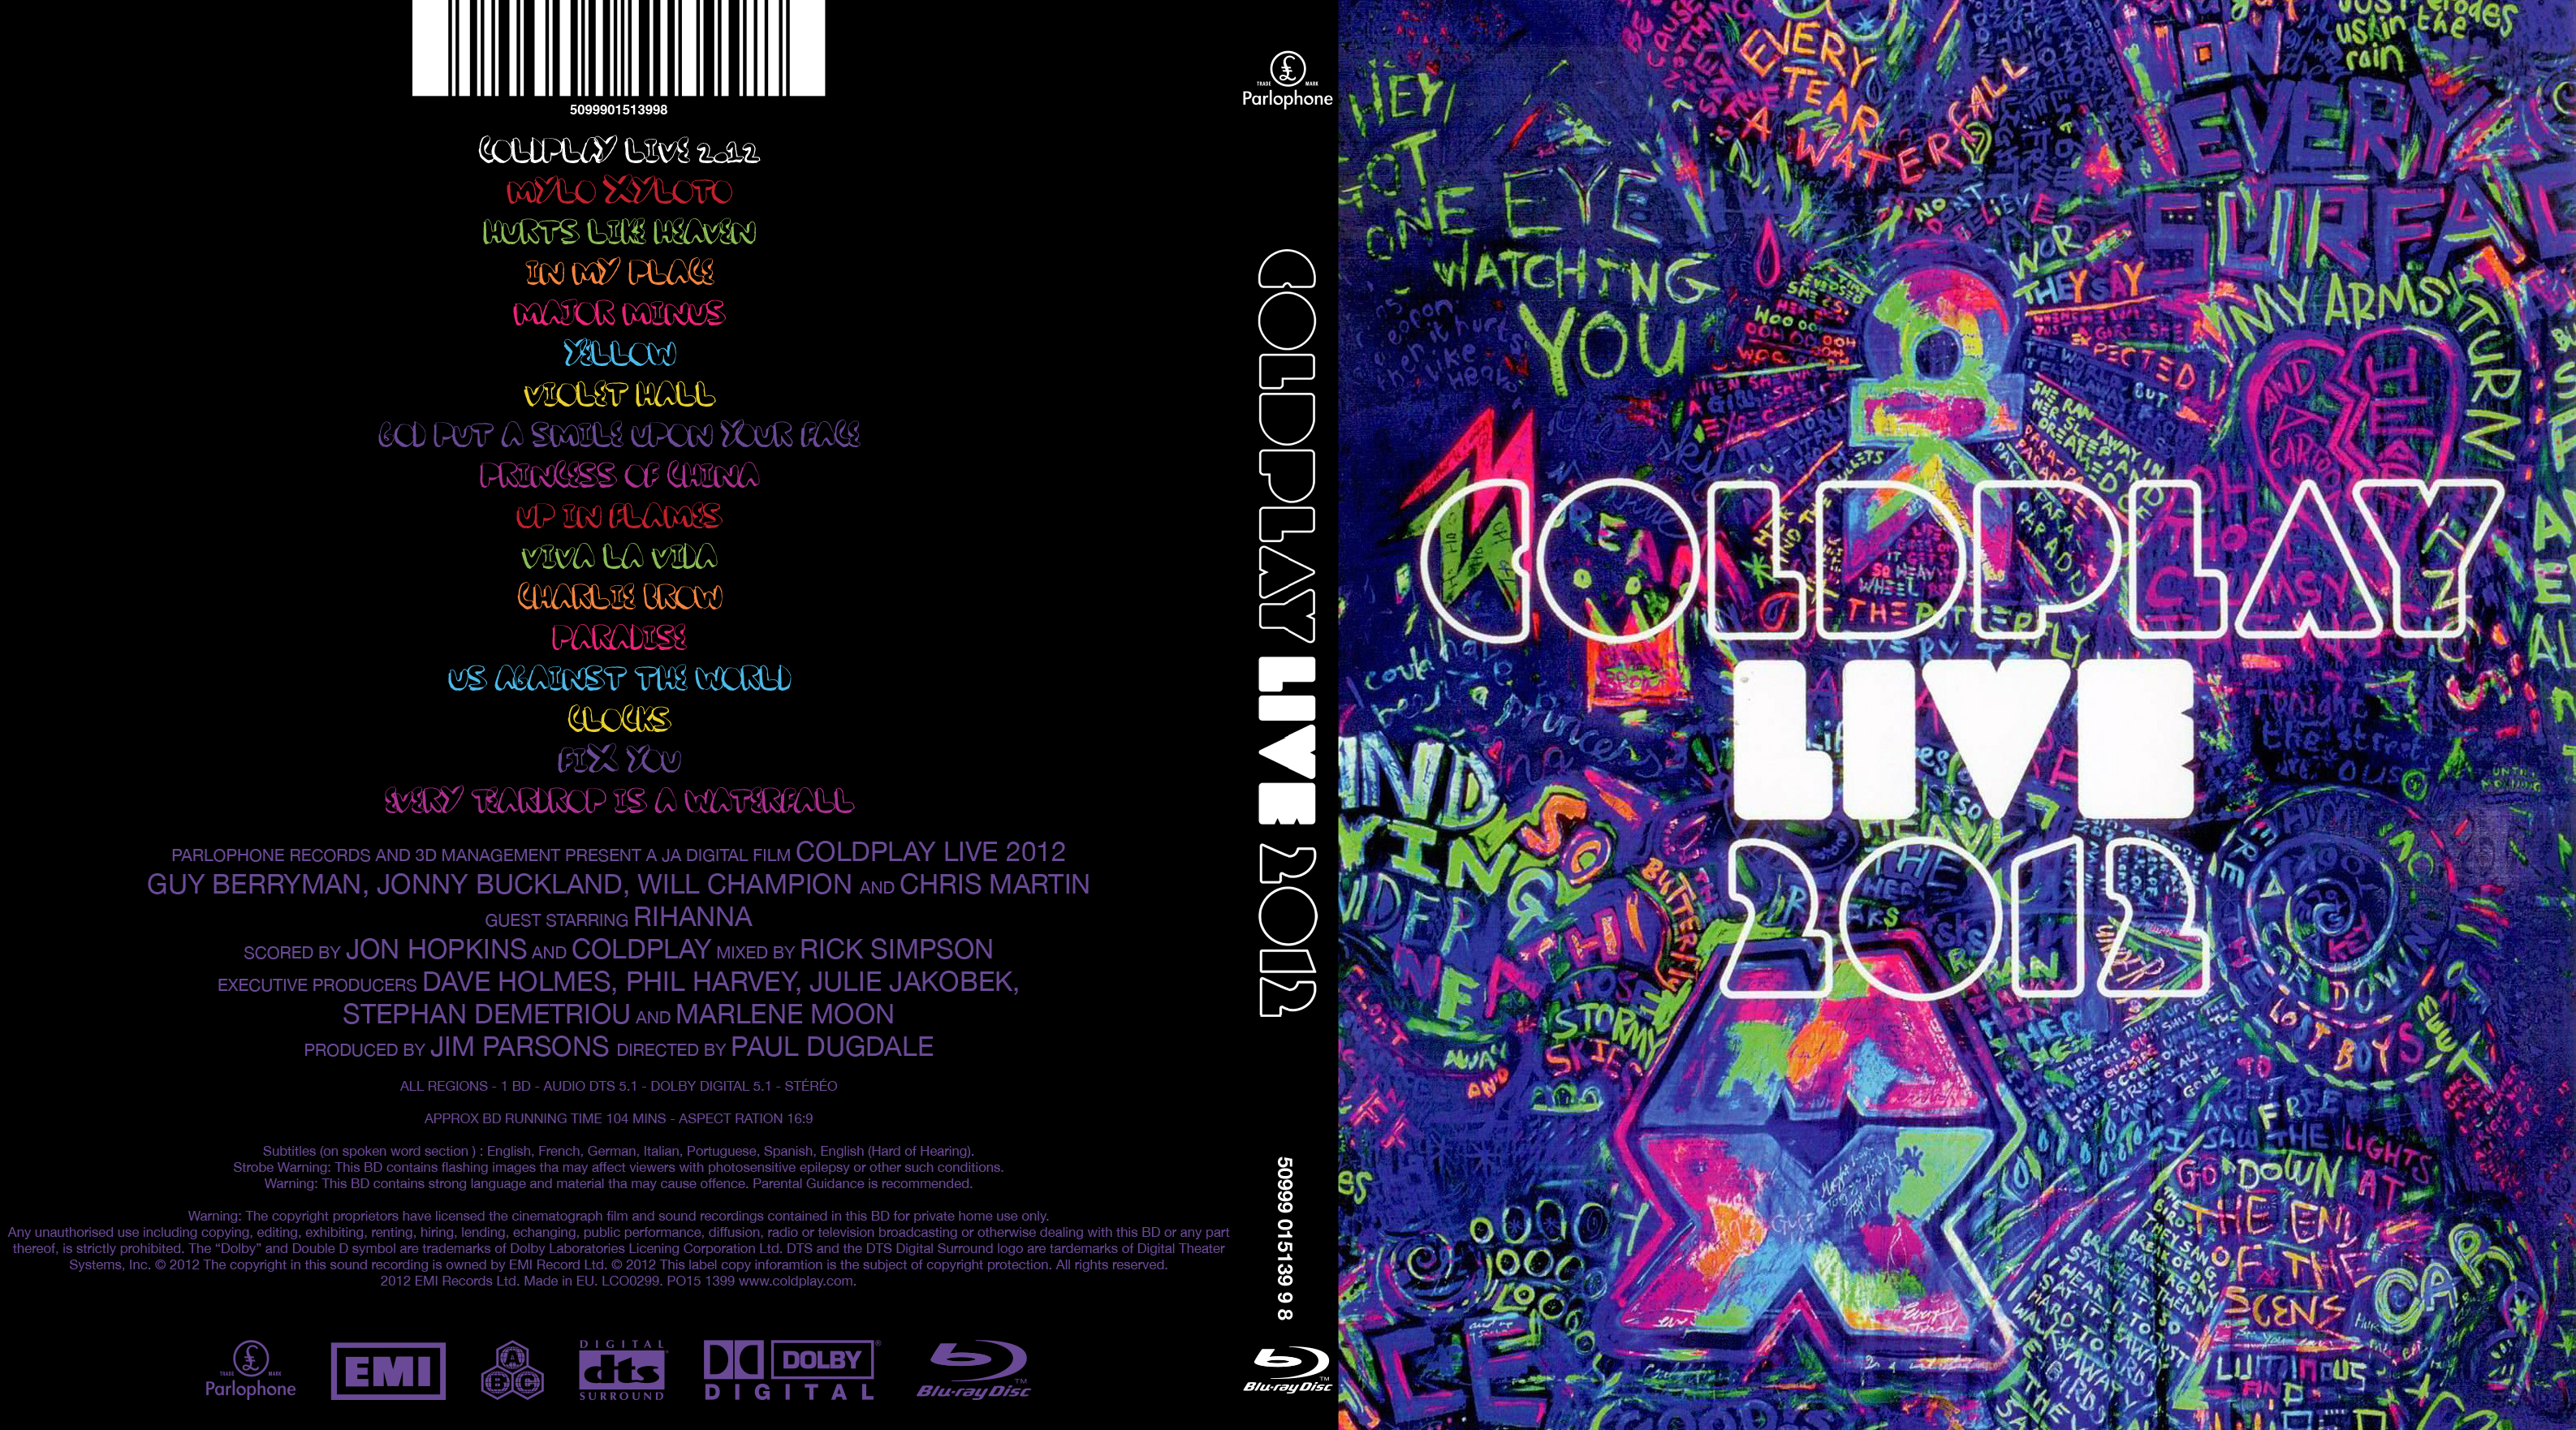 Jaquette DVD Coldplay live 2012 (BLU-RAY)